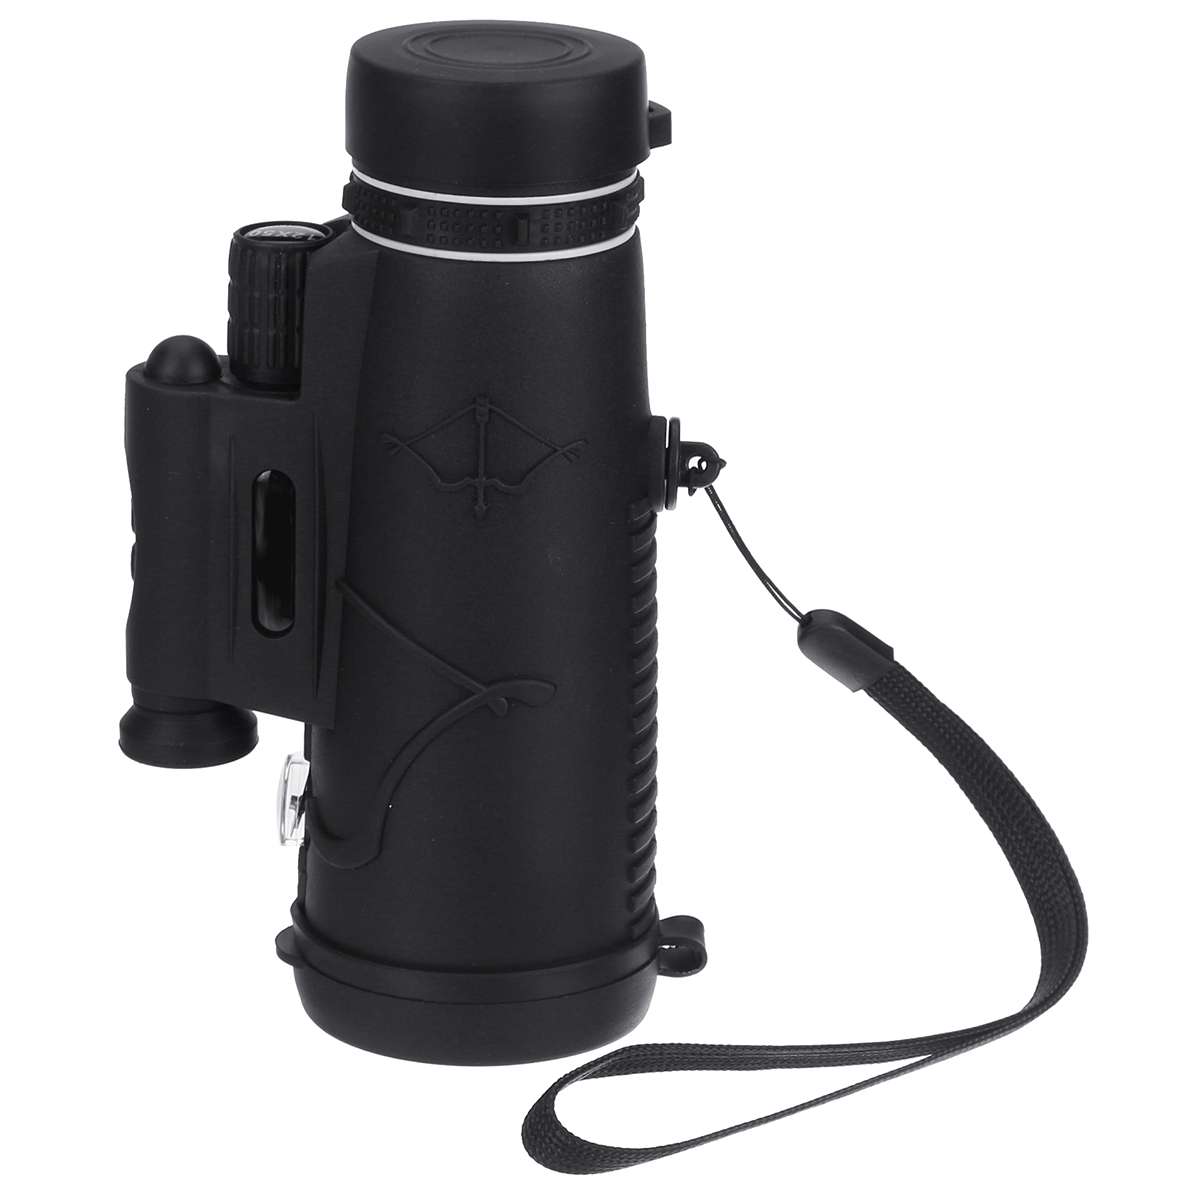 1250-High-Optical-Monocular-with-Laser-Night-Light-Function-Portable-Telescope-for-Bird-Watching-Tar-1858194-12